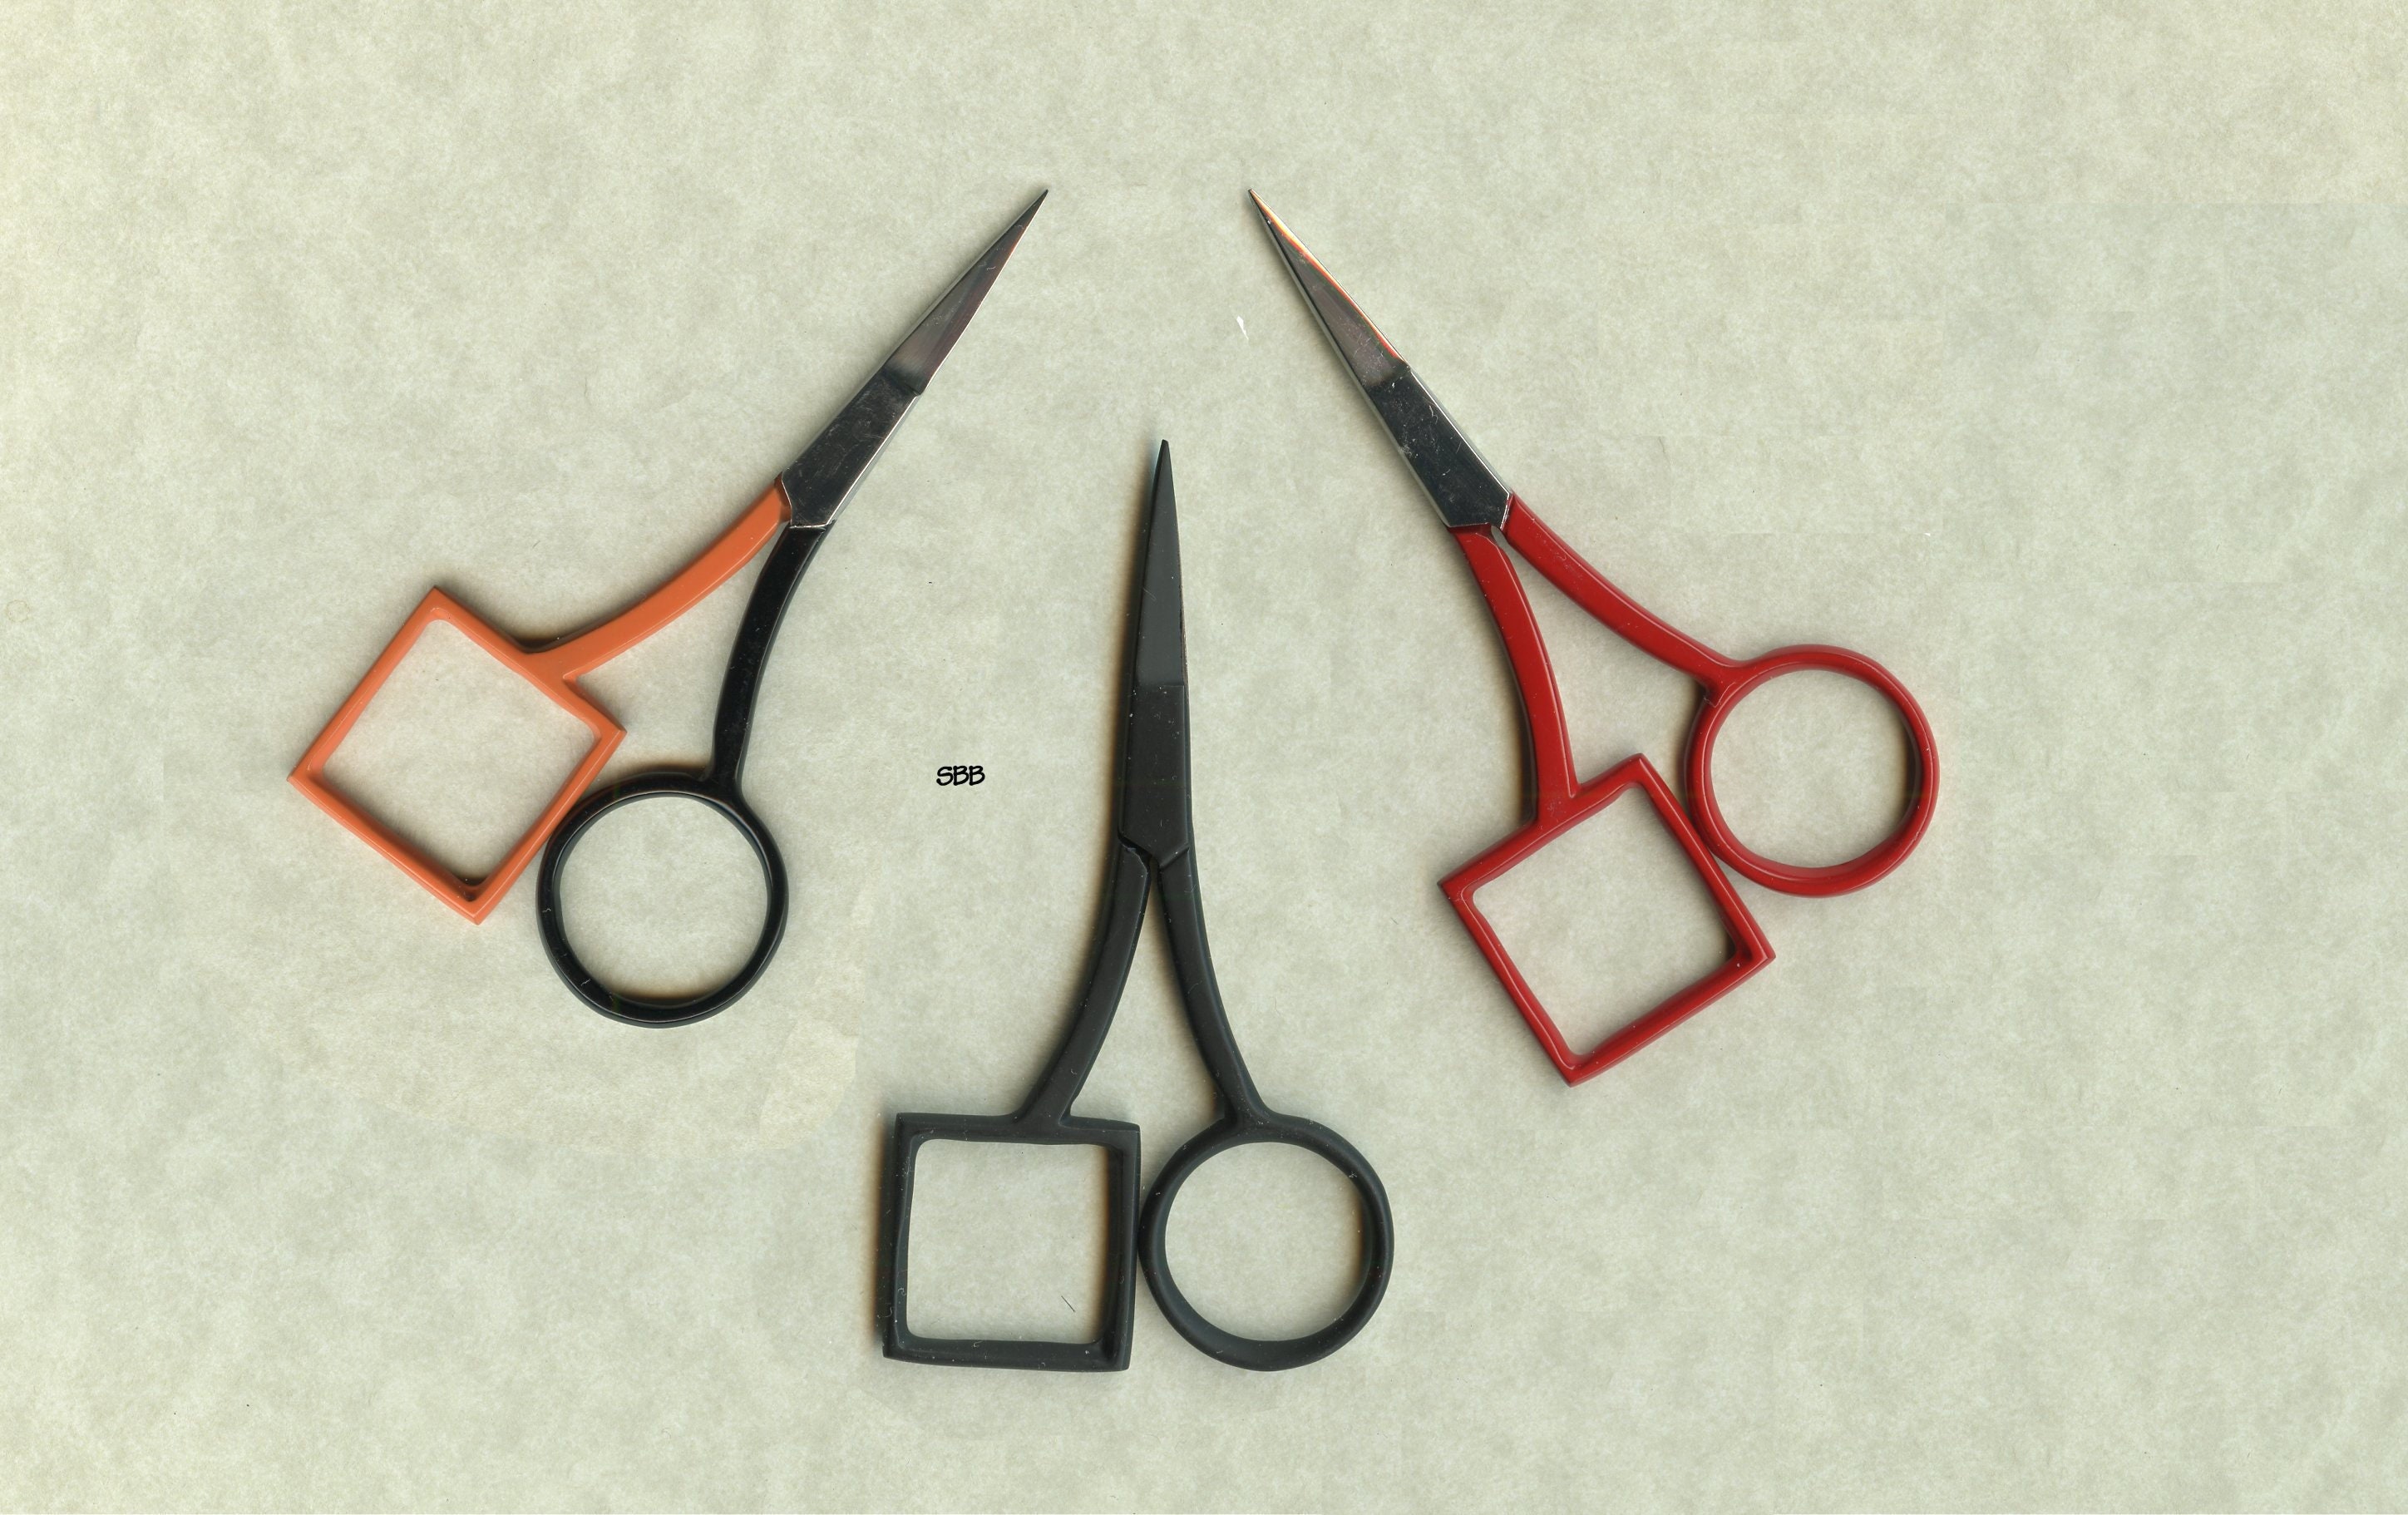 Small Black Embroidery Scissors With Round Circular Handles